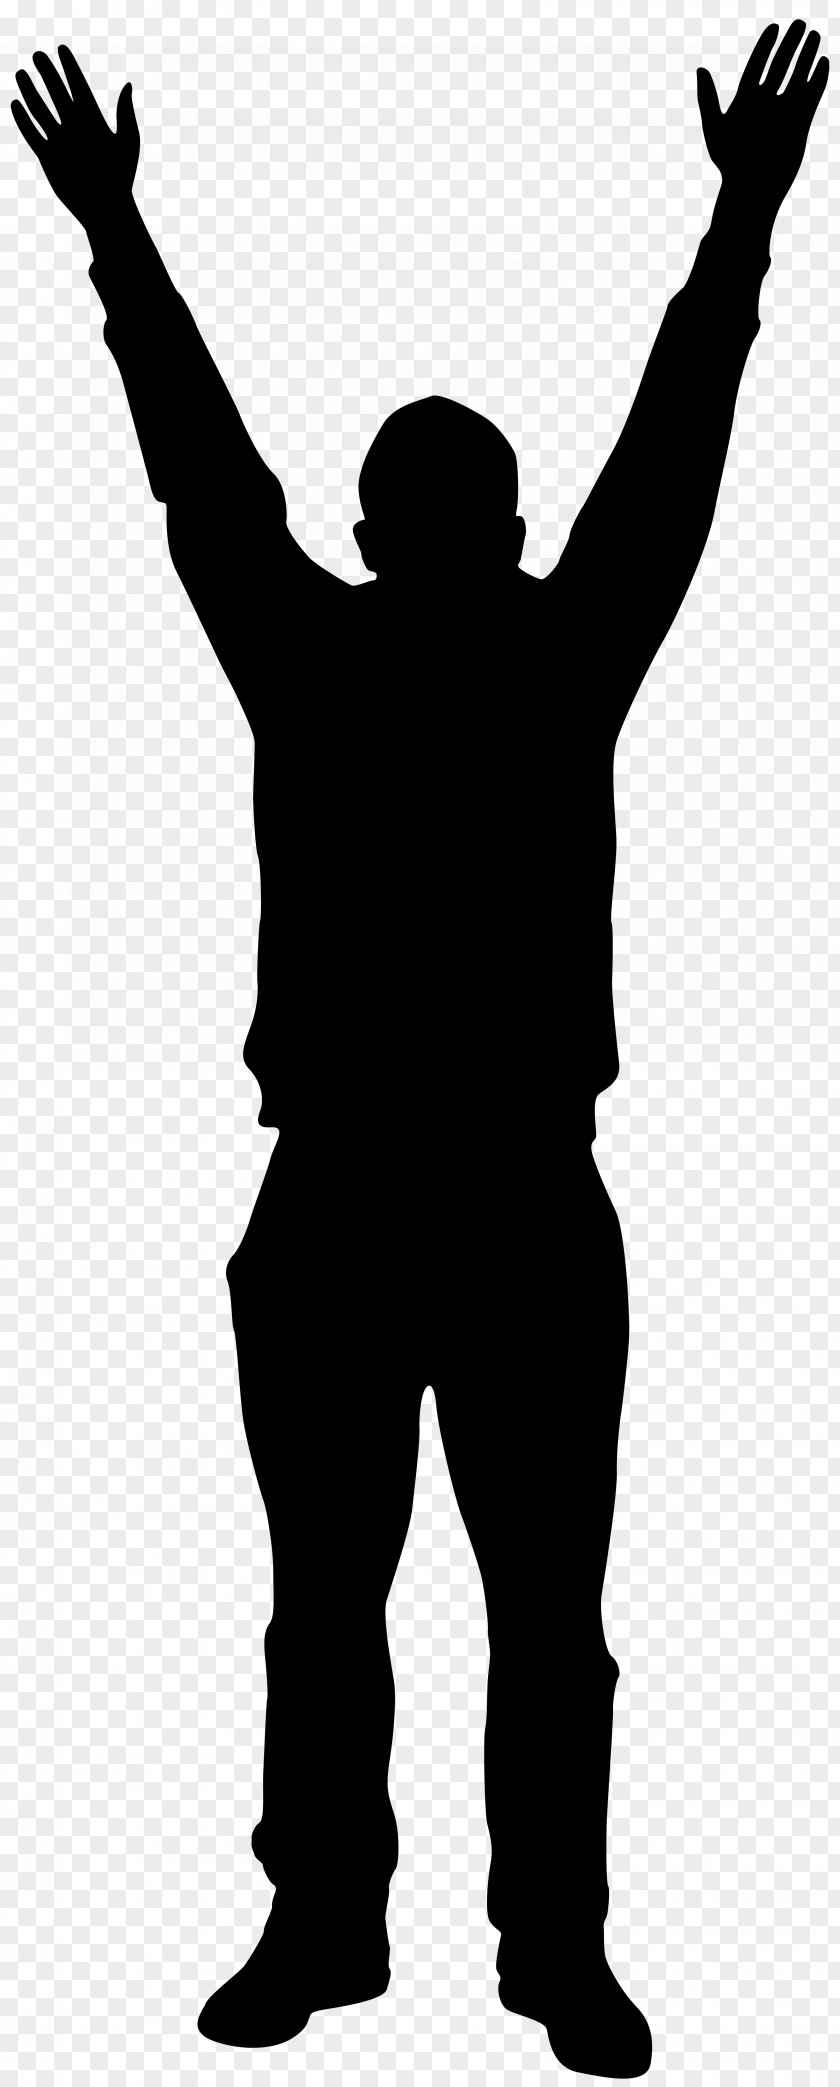 Silhouette Image Black And White Clip Art PNG